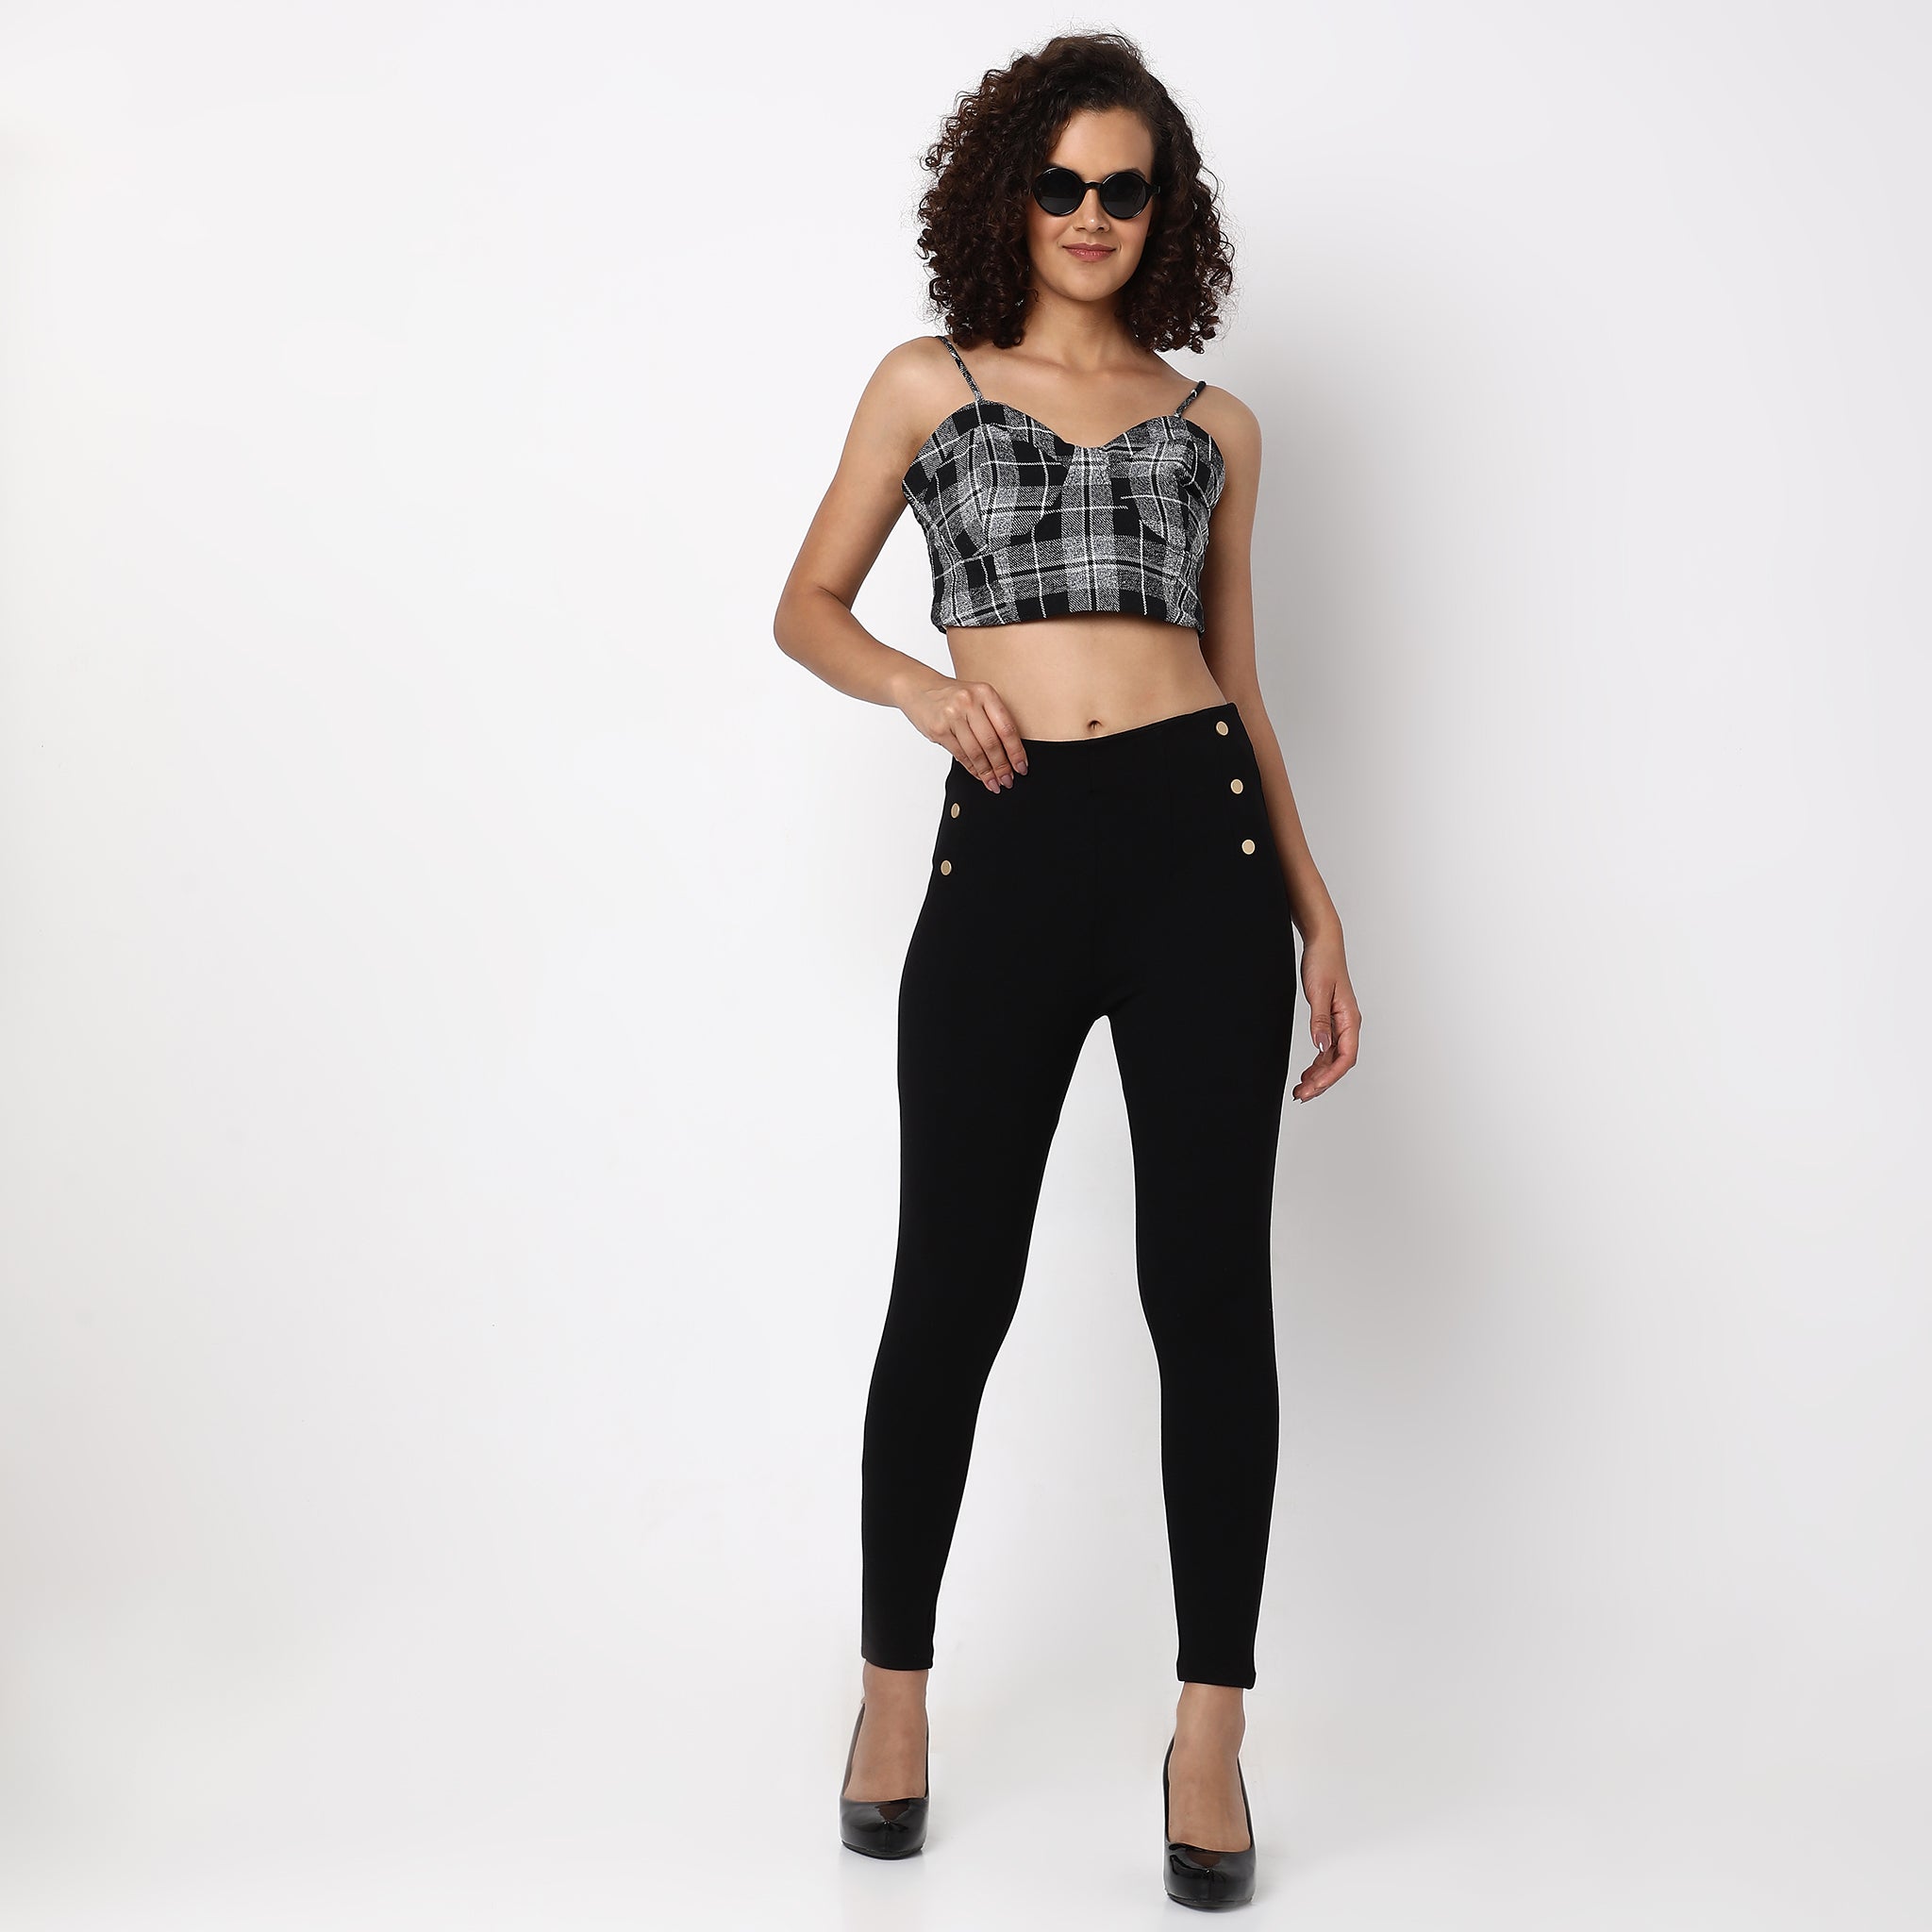 Jeggings For Women - Buy Ladies Jeggings Online in India - Style Union